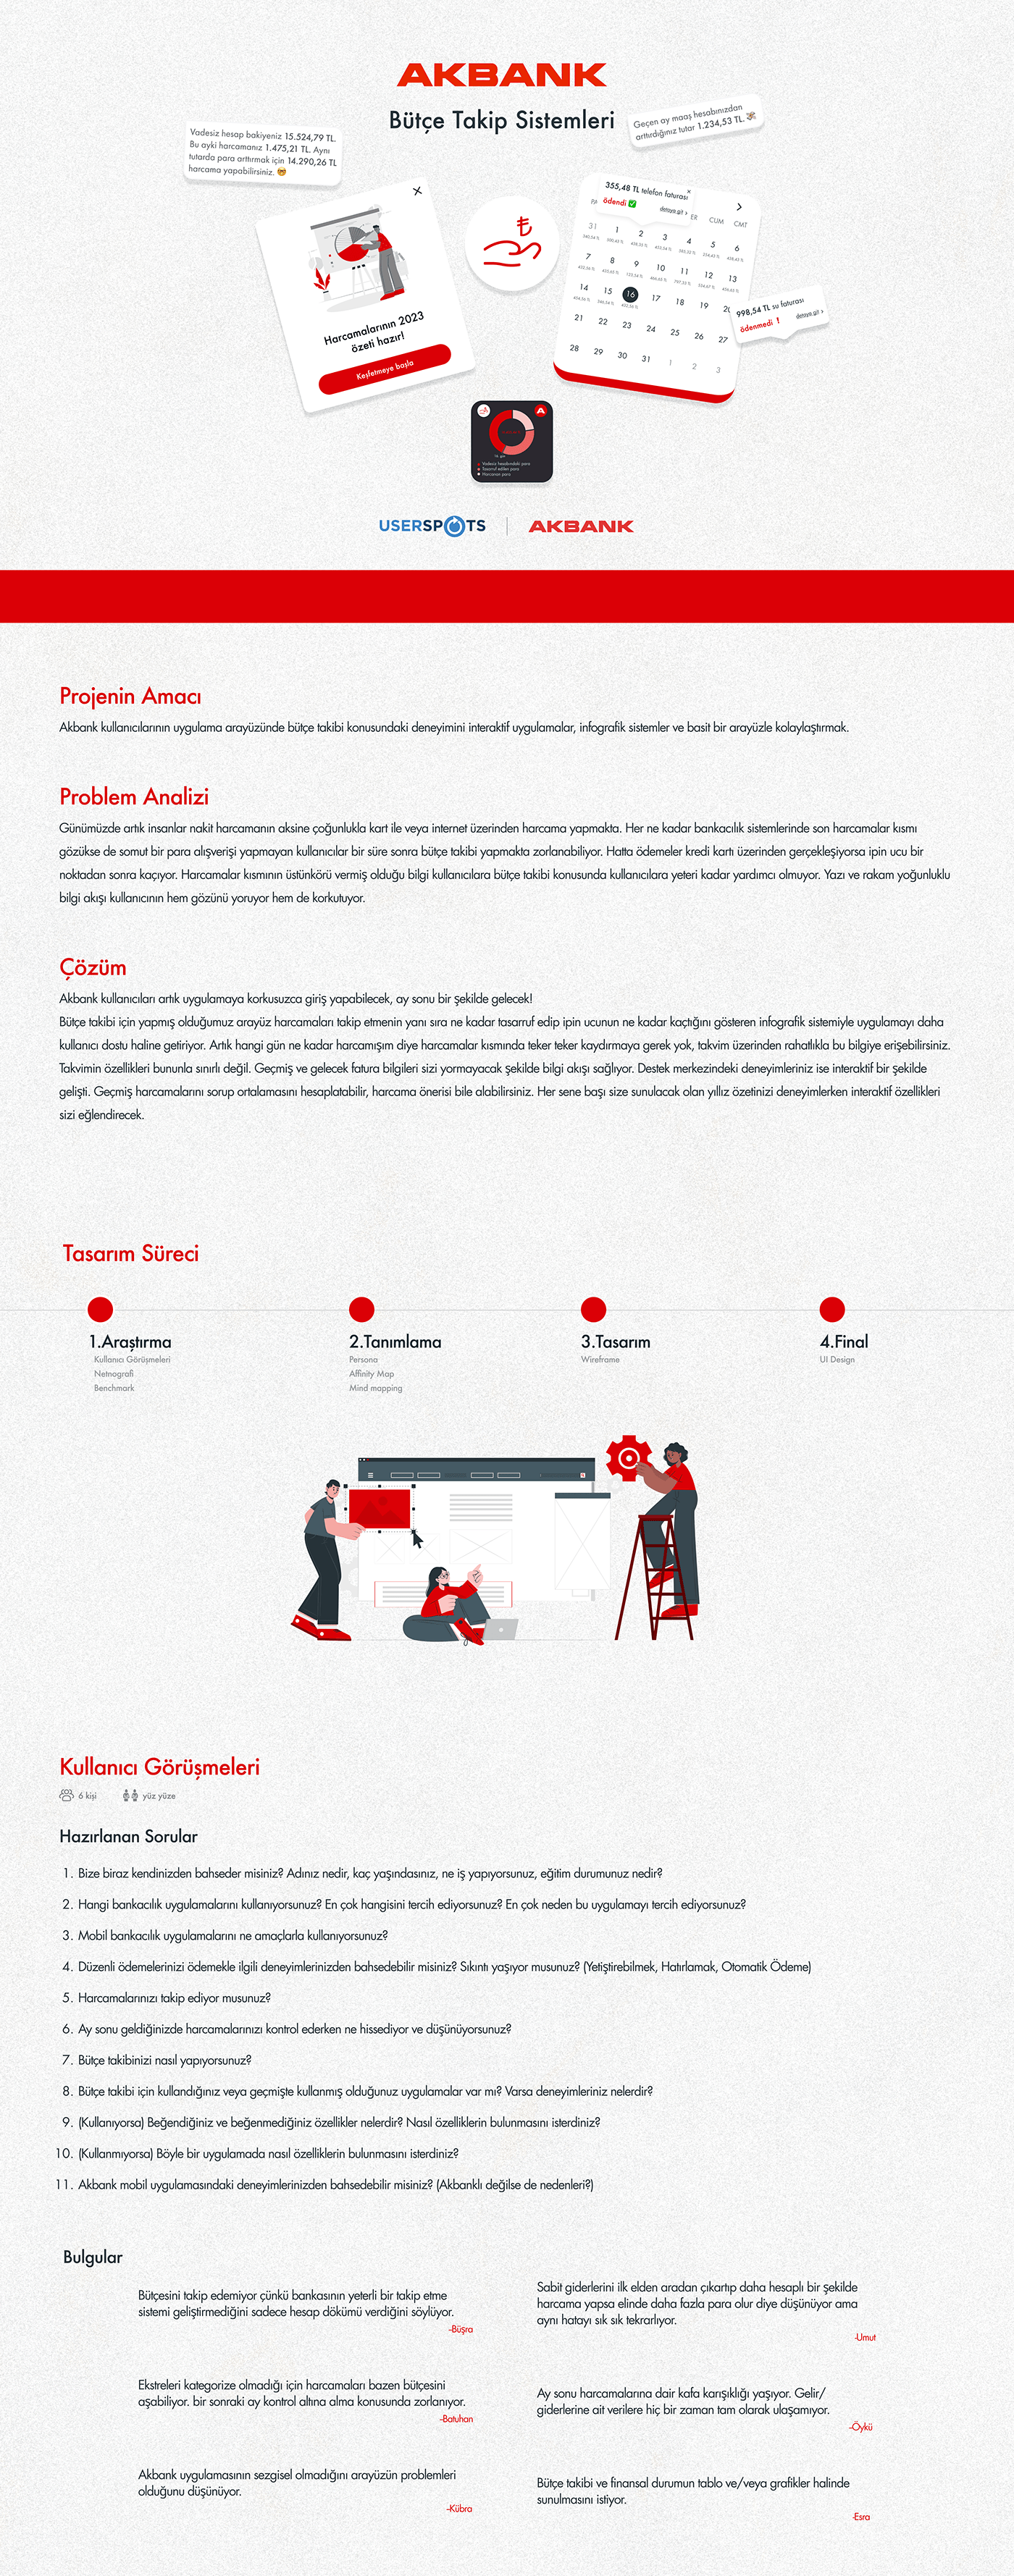 Akbank UI/UX ux design thinking user experience Figma user interface app design Case Study userspots